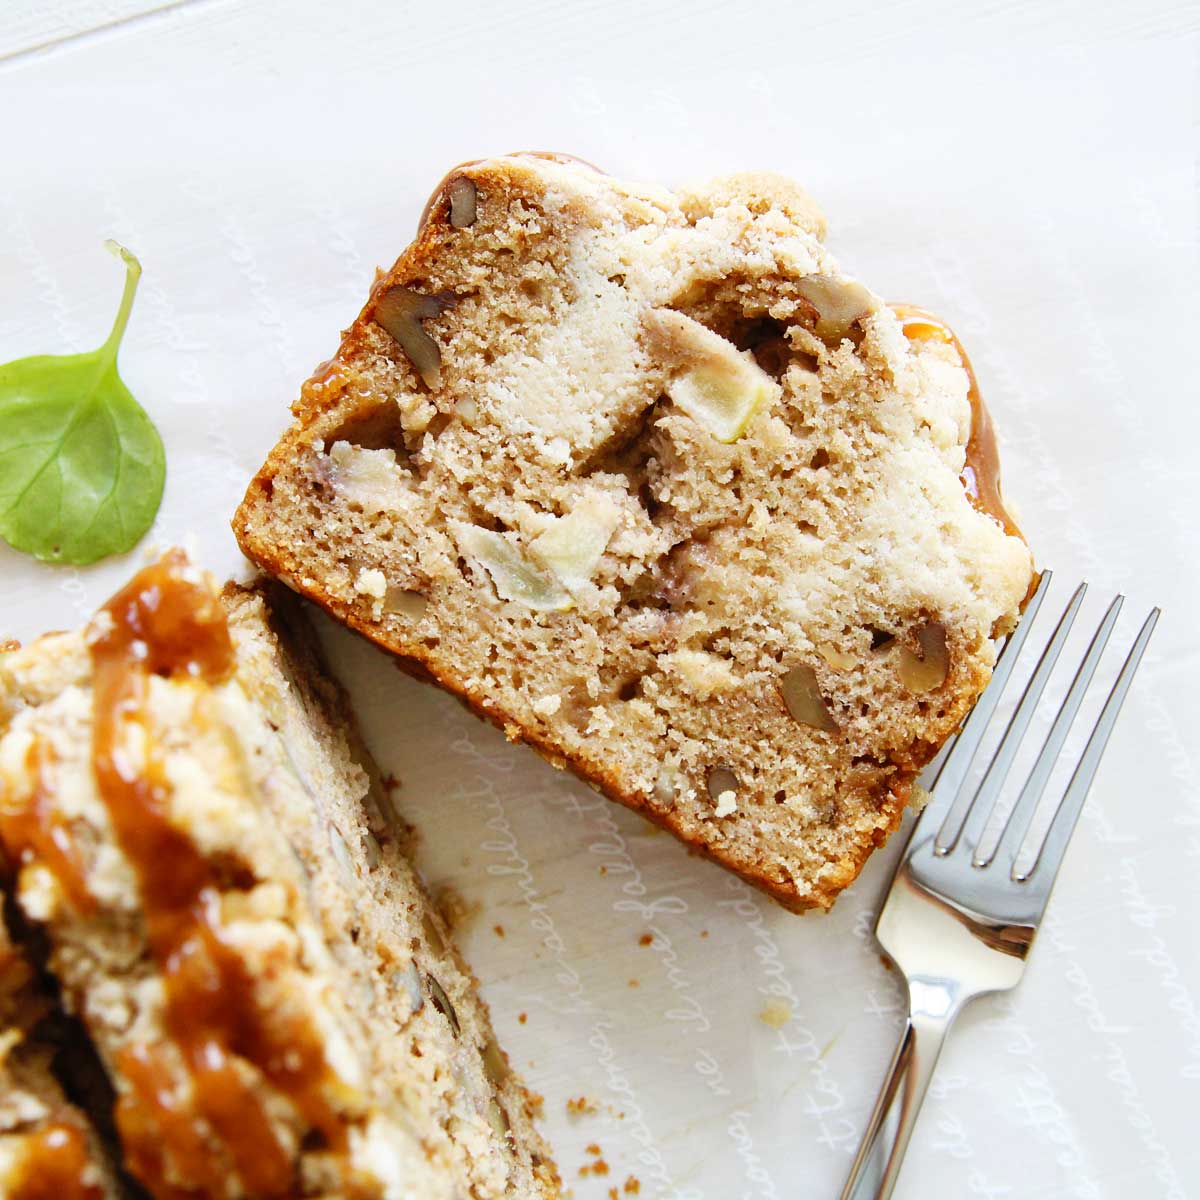 The Most Comforting Applesauce Banana Bread with Streusel Topping - Vegan Chocolate Whipped Cream